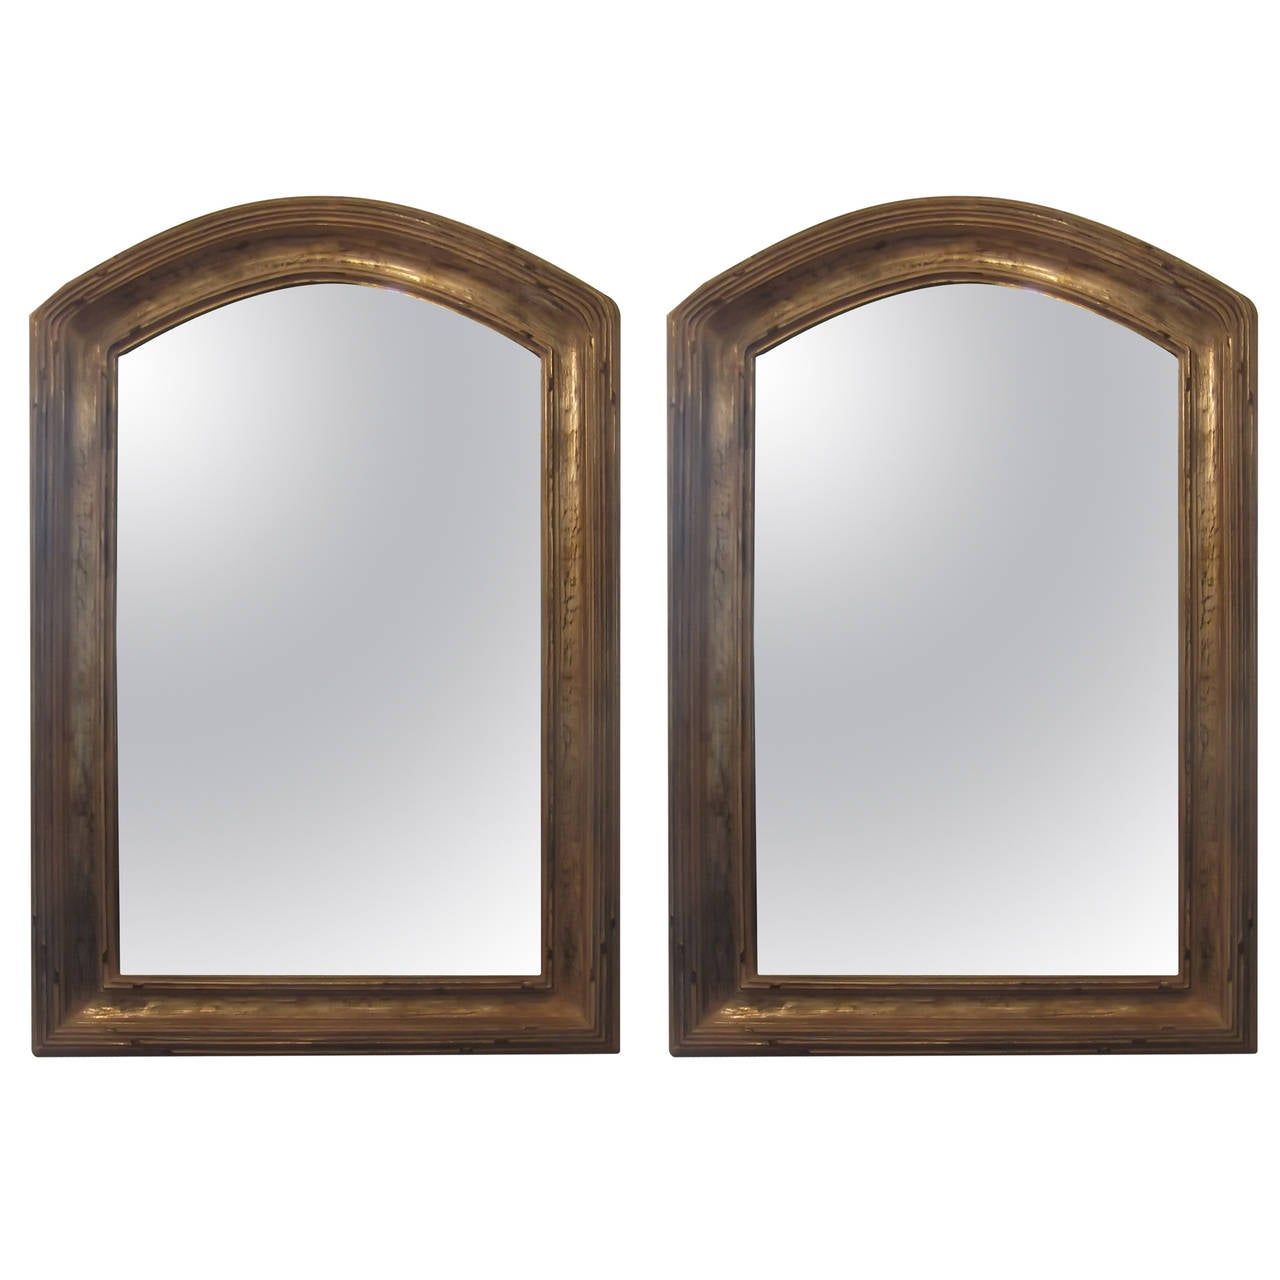 Pair Of Giltwood Arched Top Mirrors At 1stdibs Inside Gold Arch Top Wall Mirrors (View 7 of 15)